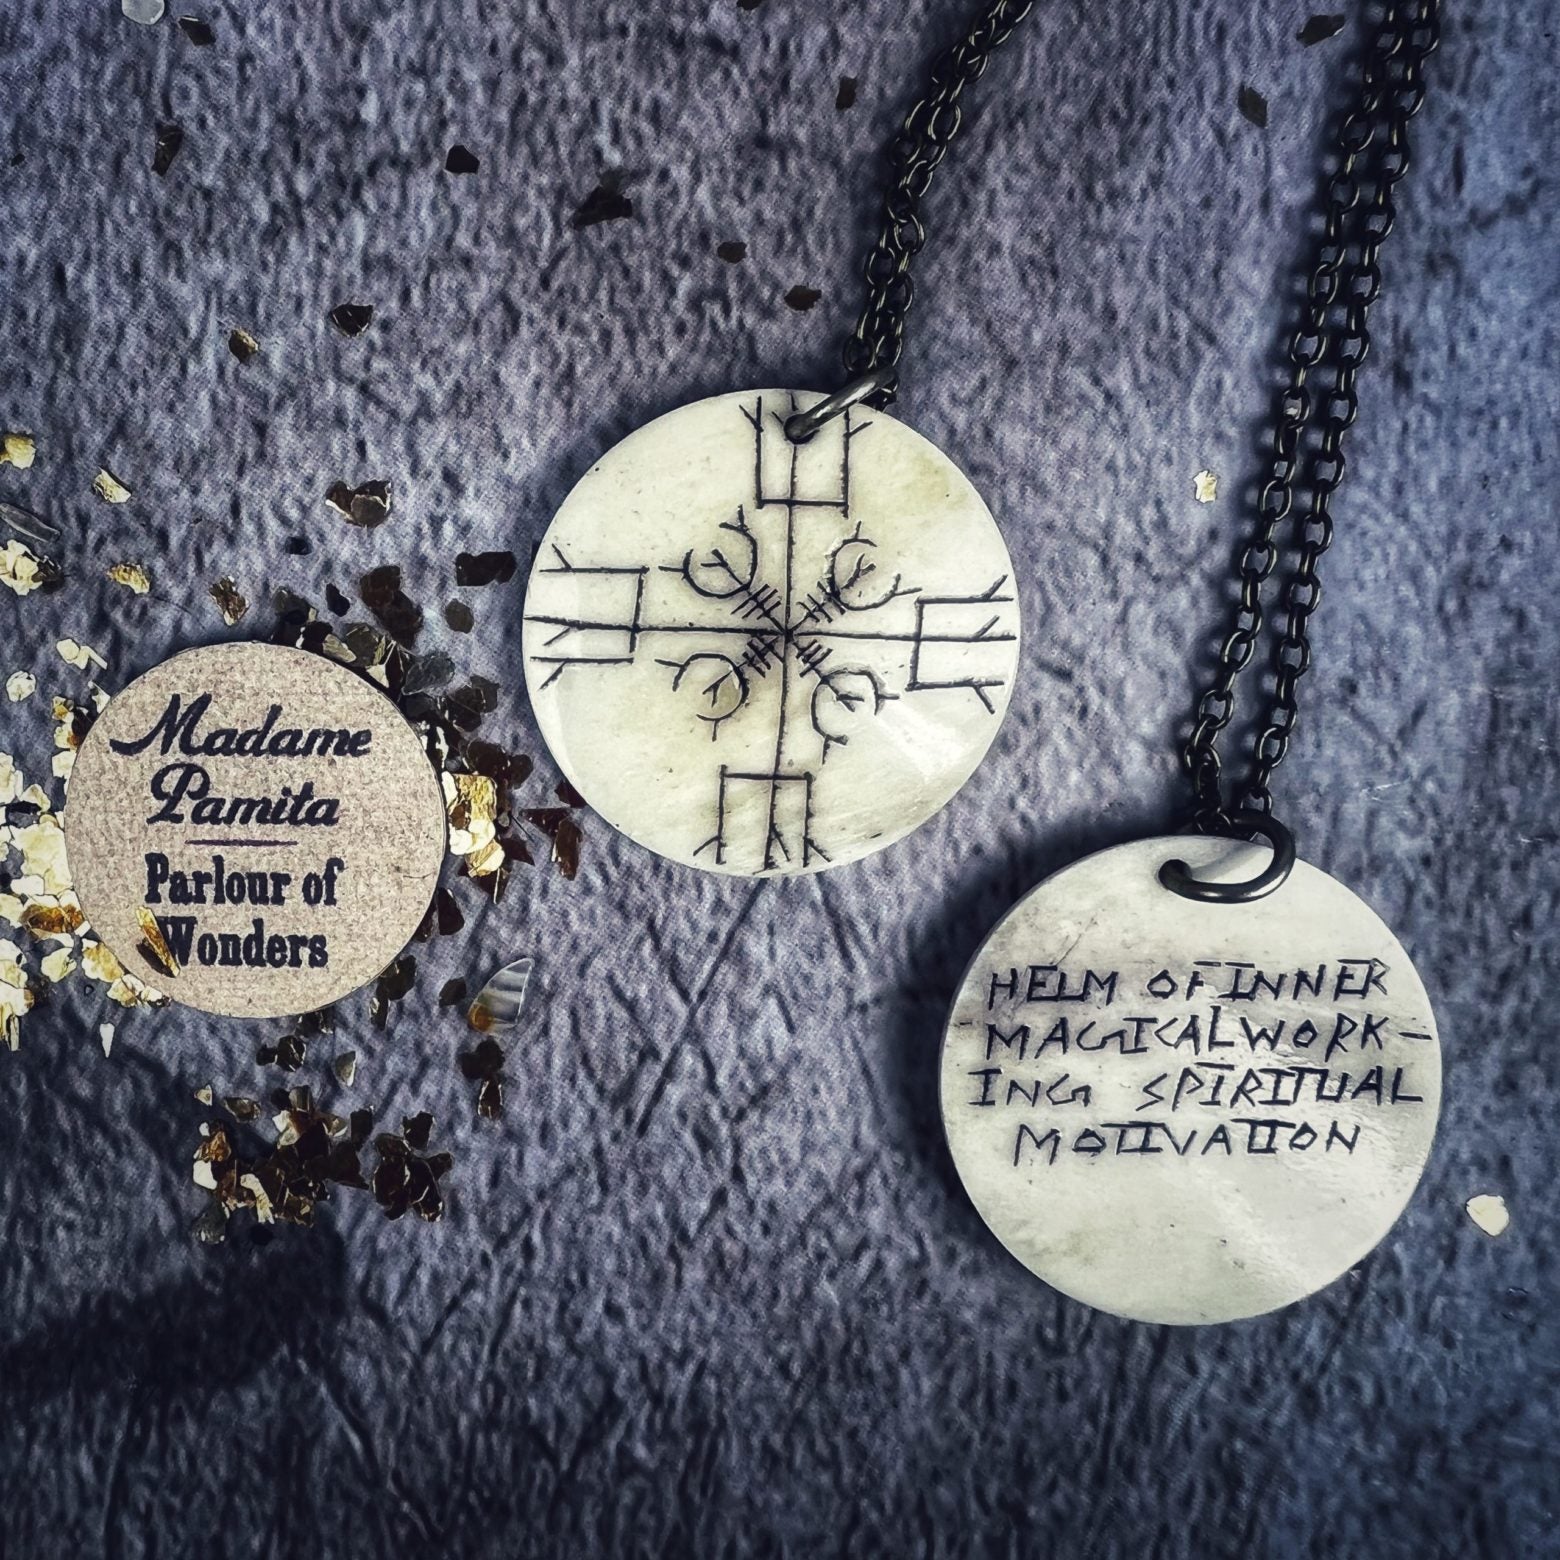 Helm of Inner Magical Working Spiritual Motivation Bone Charm Necklace